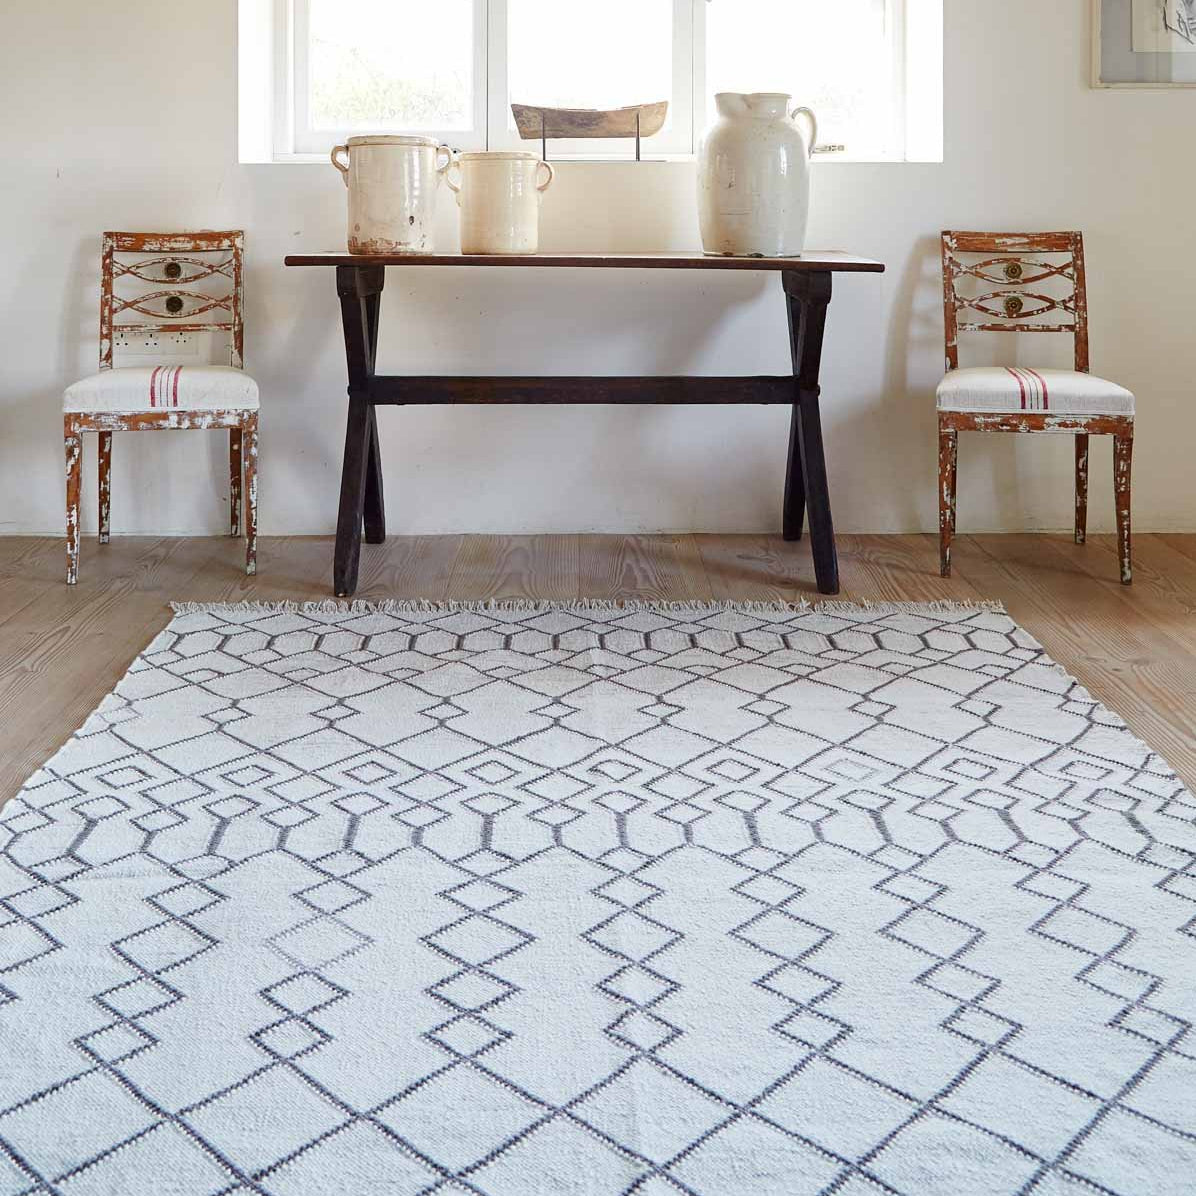 Medina Tangier Rug with table and chairs